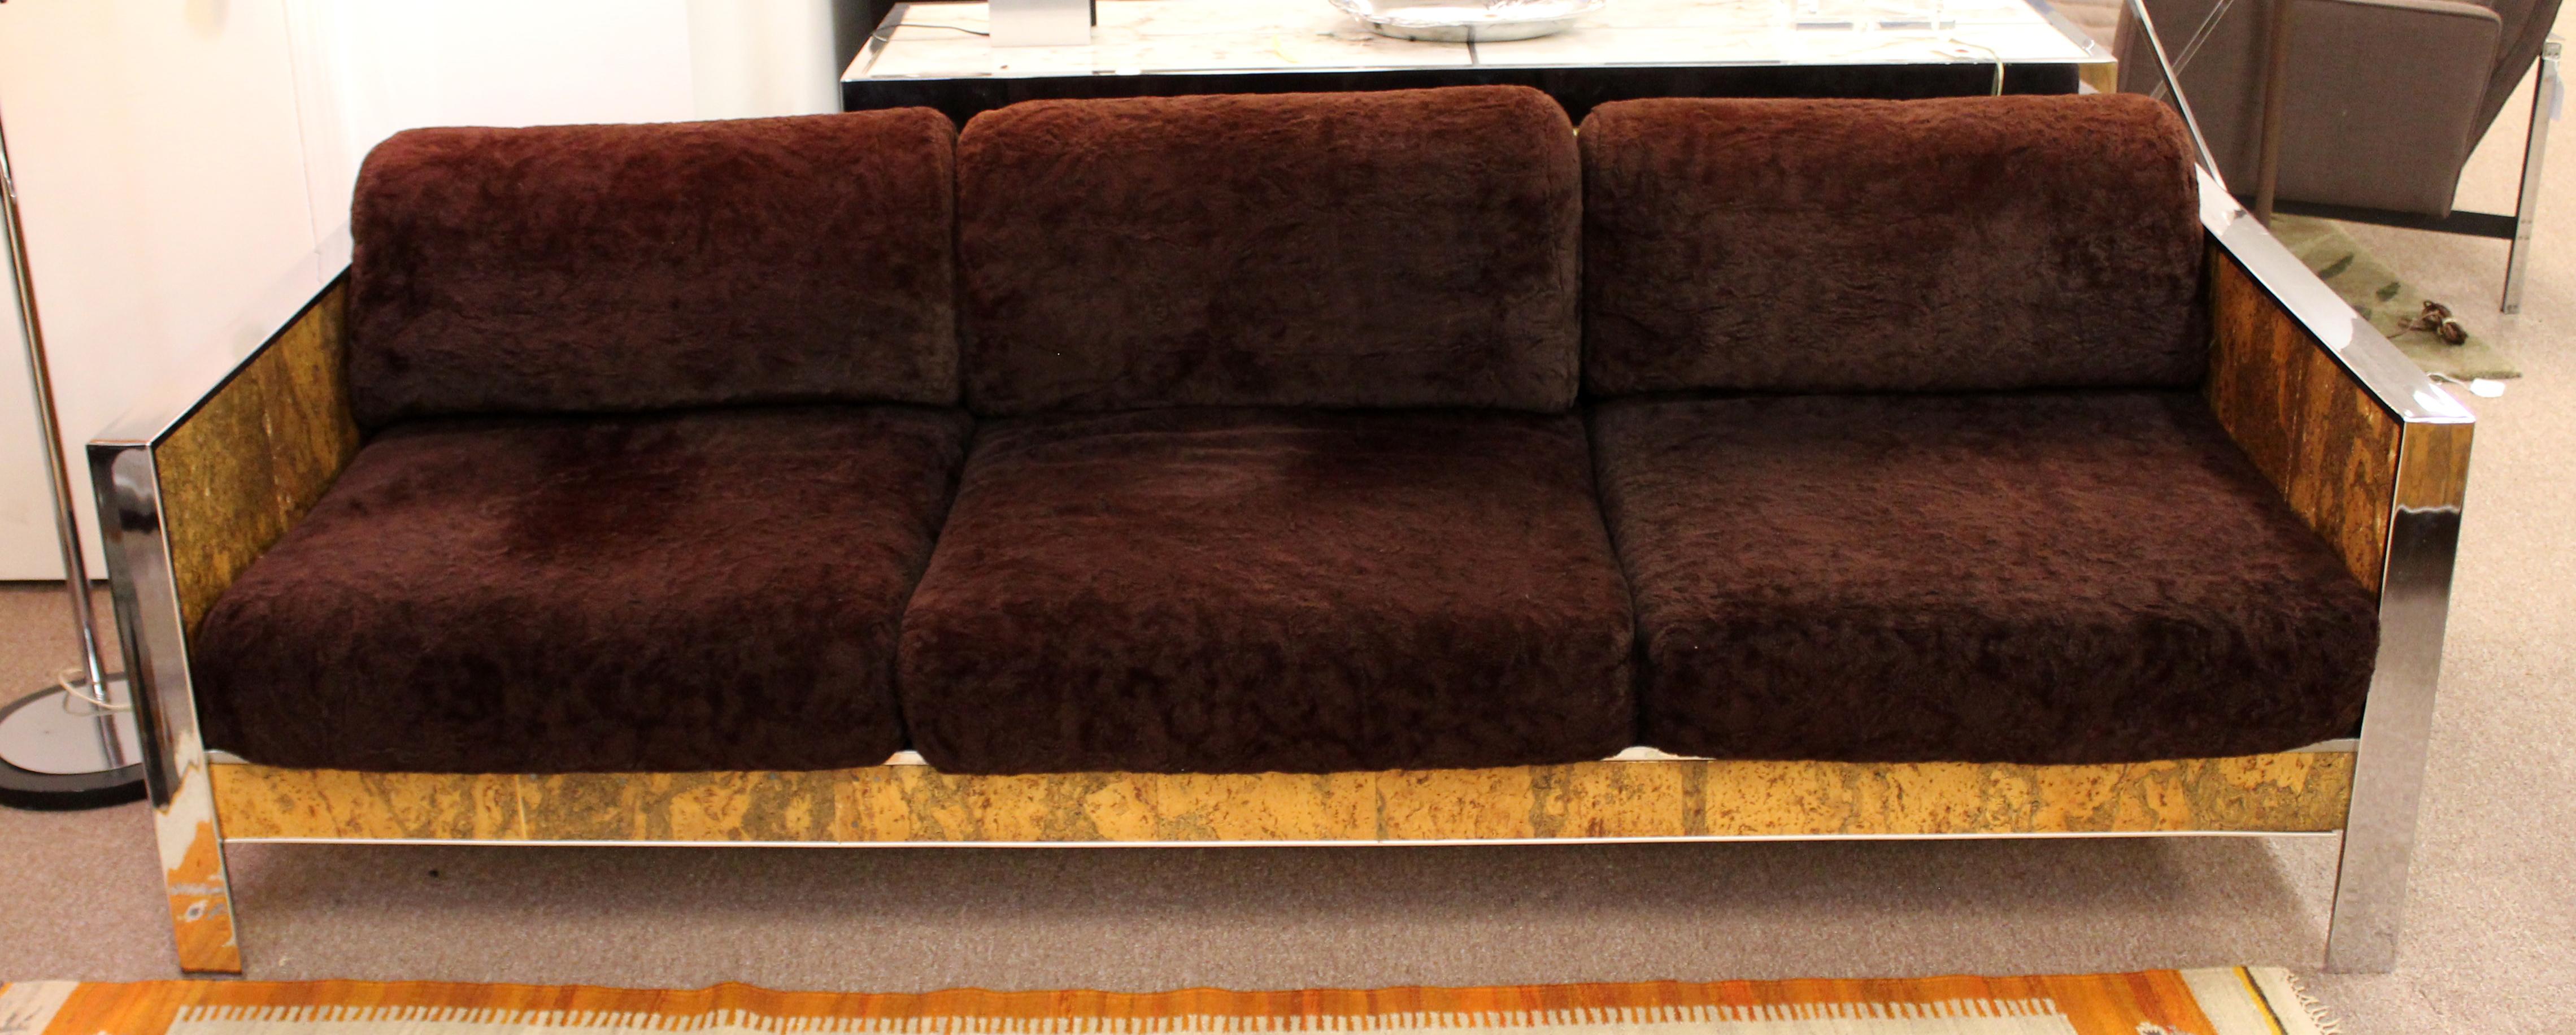 For your consideration is an incredible sofa, made of cork and trimmed in flat bar chrome, by Adrian Pearsall, circa the 1970s. In very good vintage condition. The dimensions are 84.5